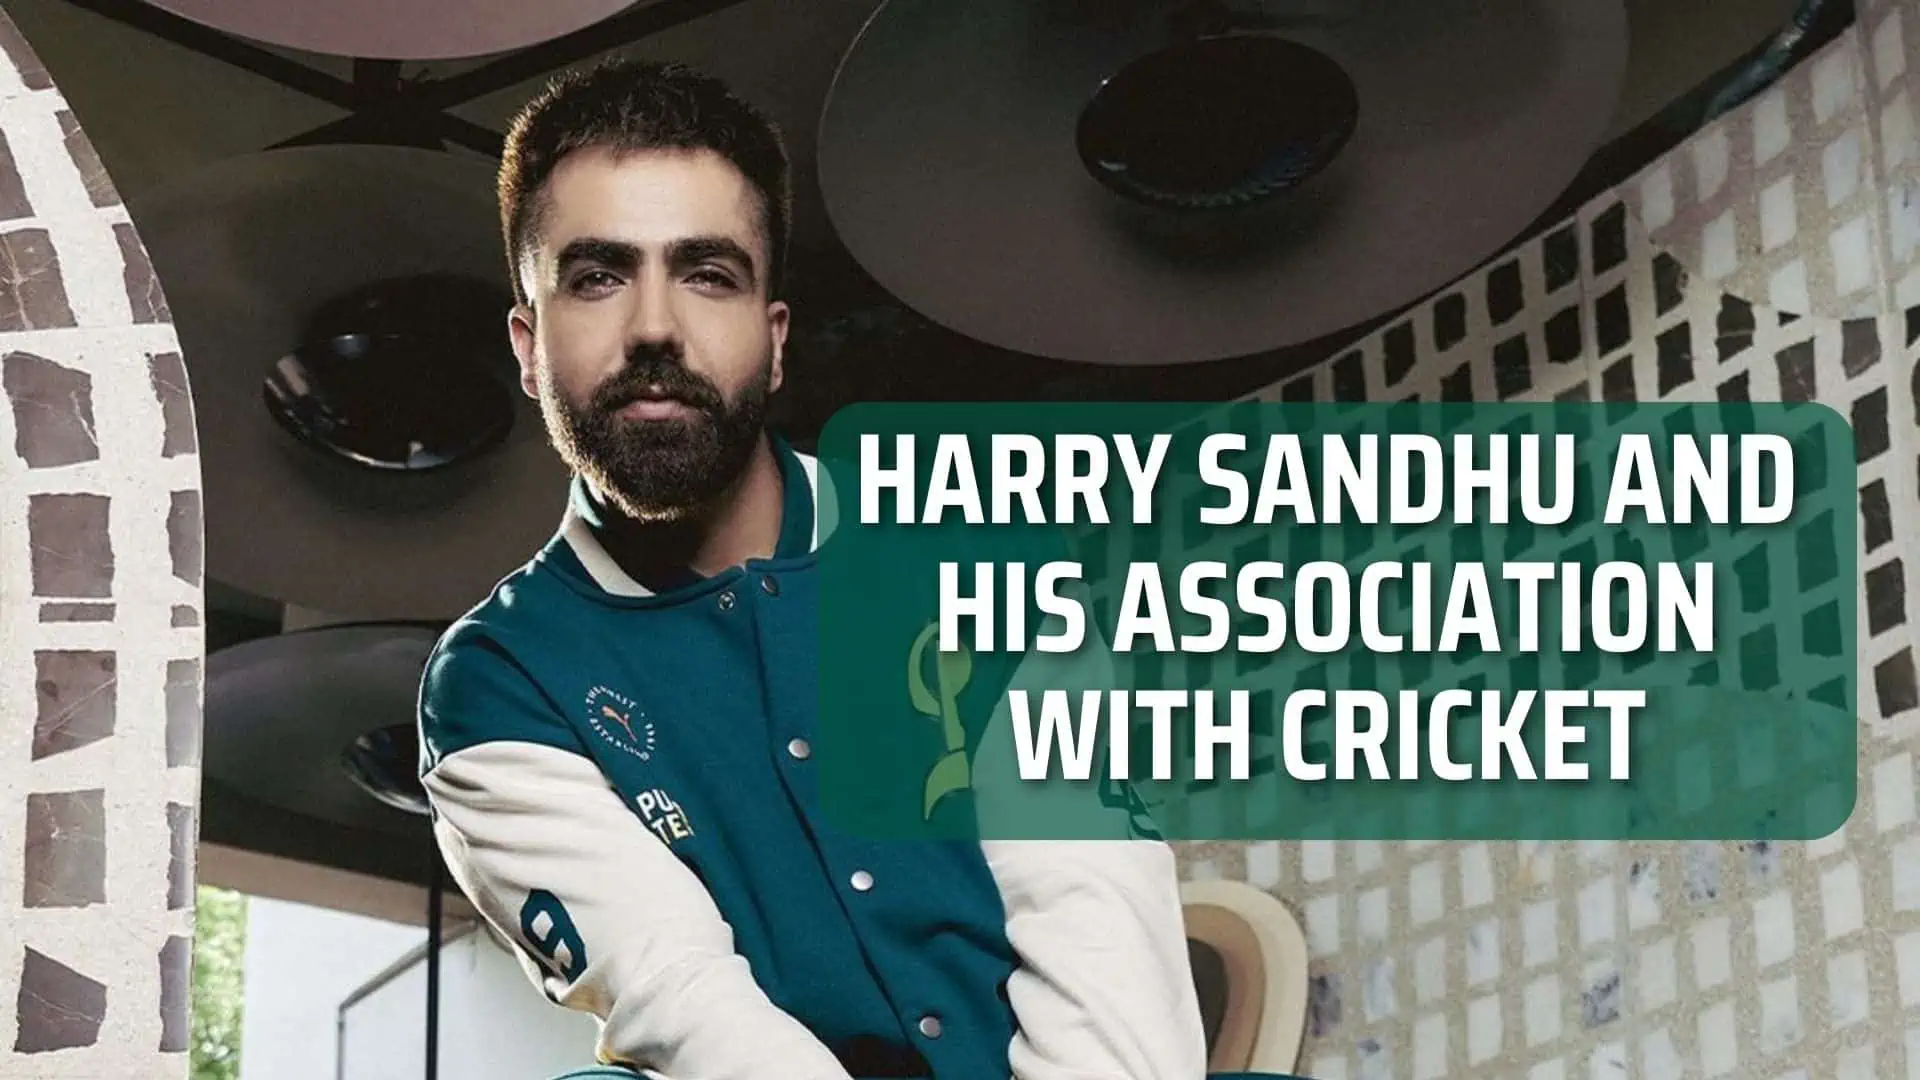 Harry Sandhu and his Association with Cricket